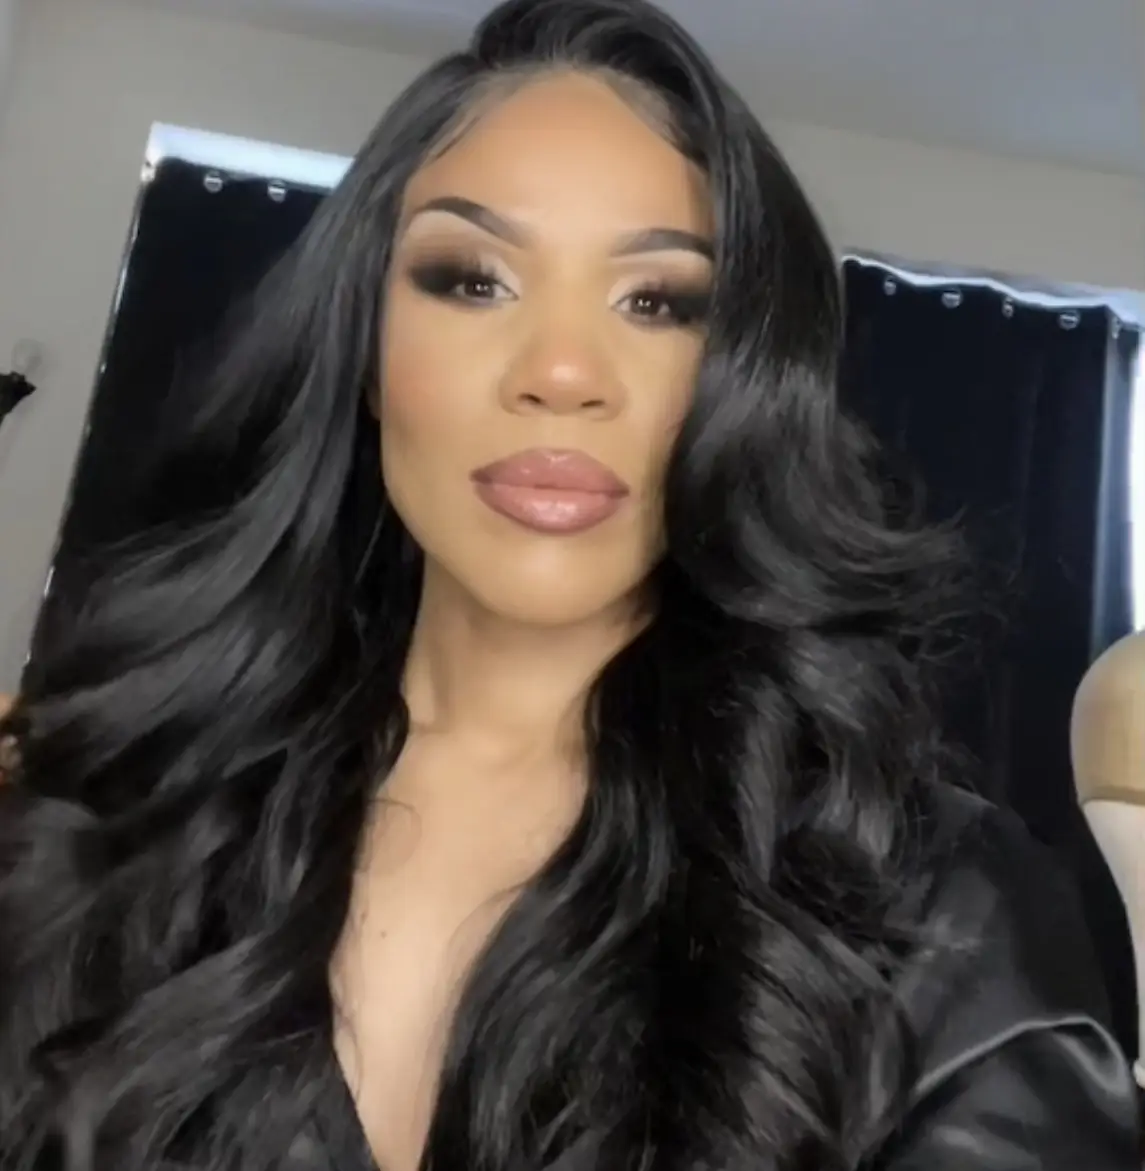 Beginner Friendly Wig Install  Video published by Lafemme_Cecile